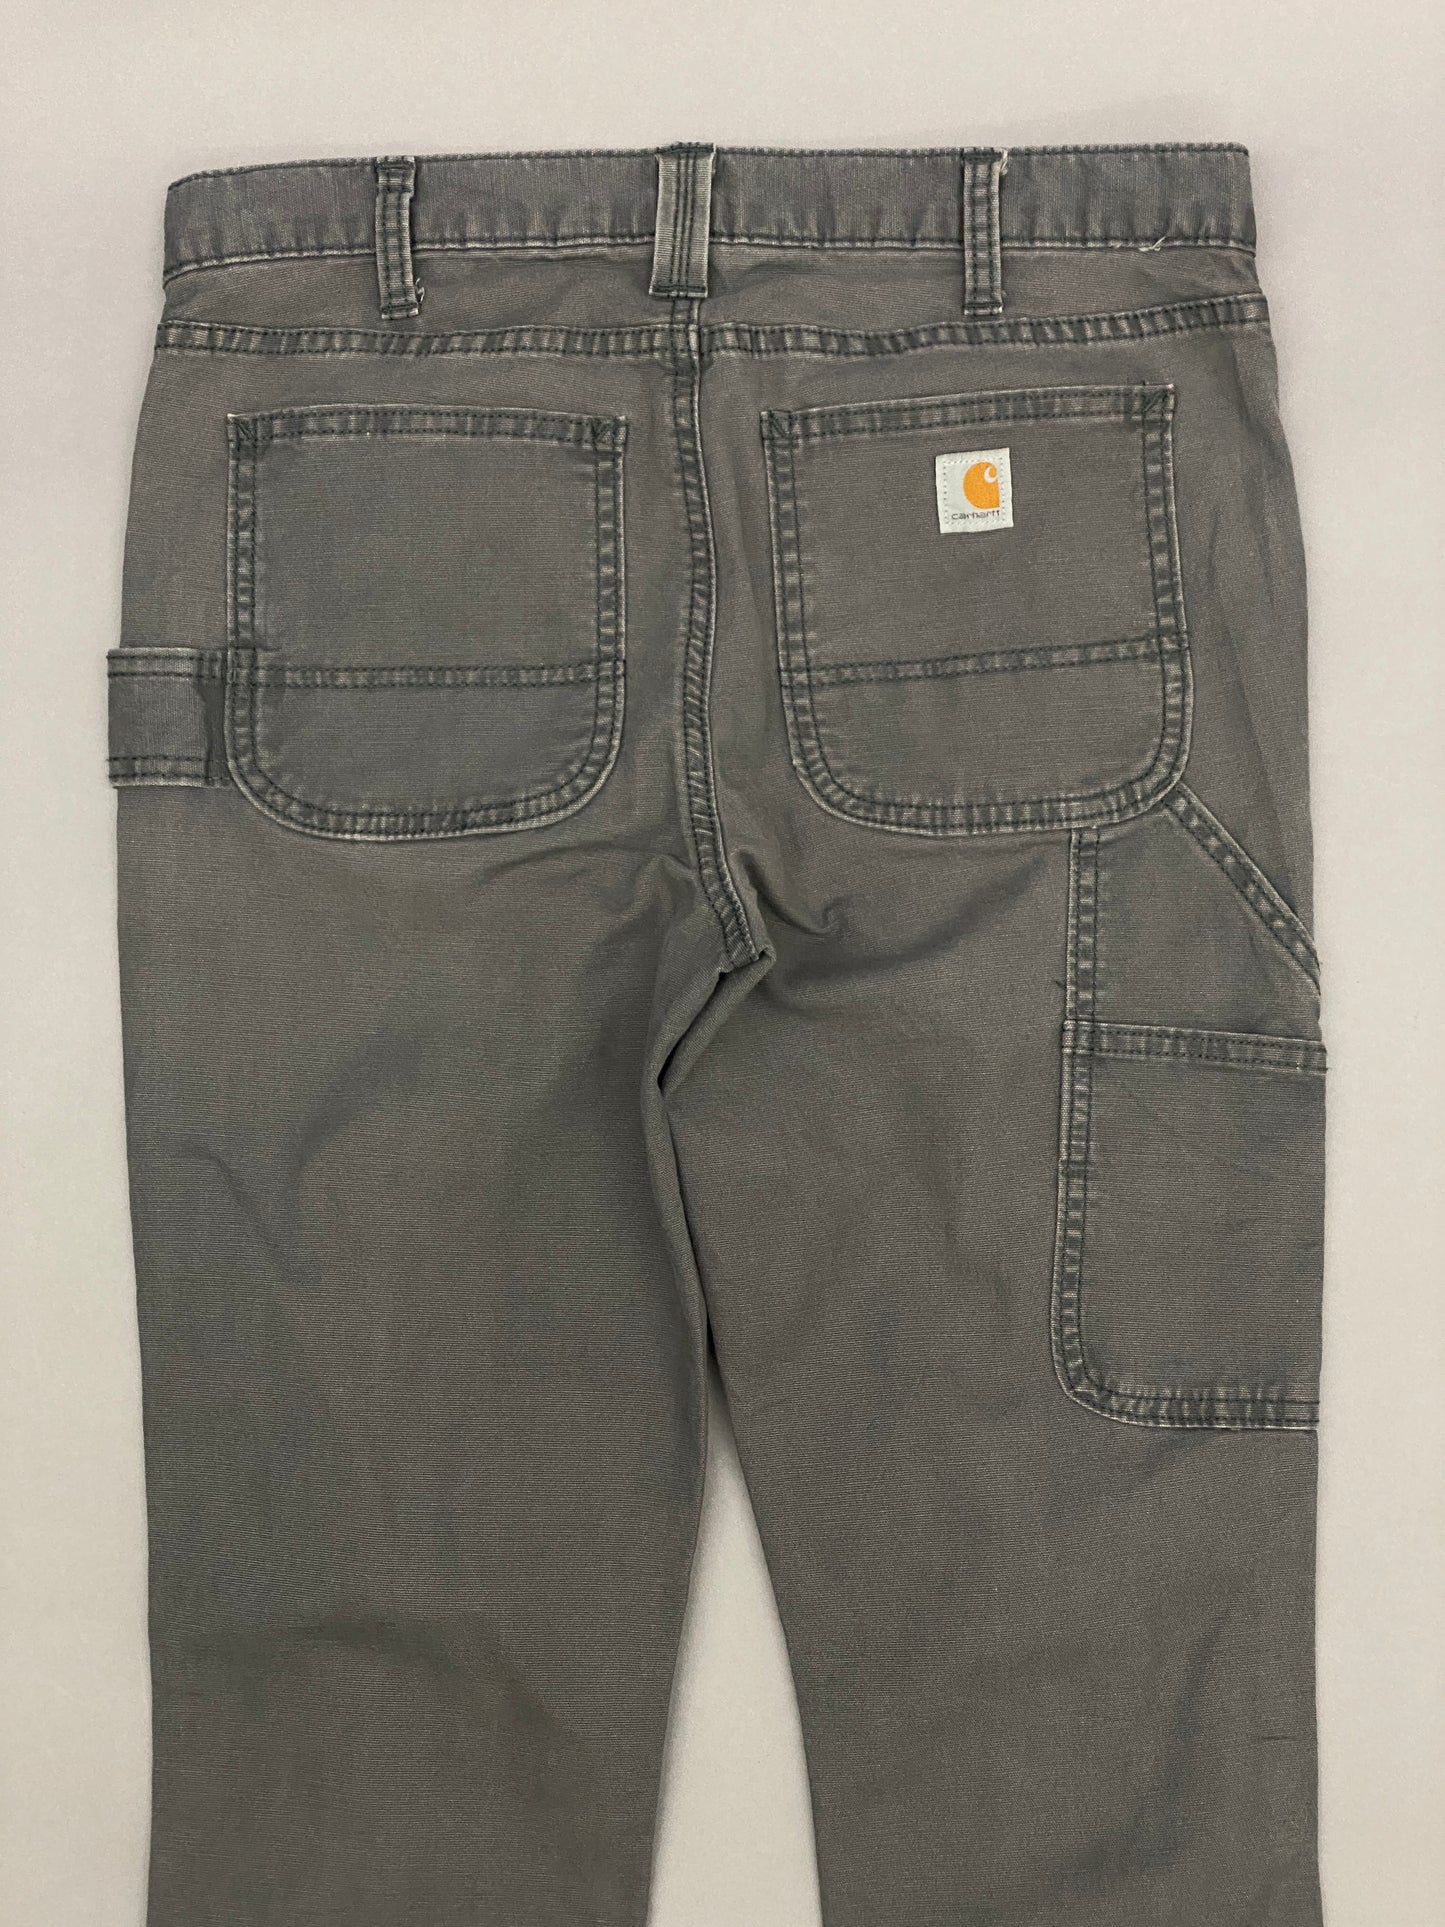 Double Knee Carhartt Jeans - W6 or 31